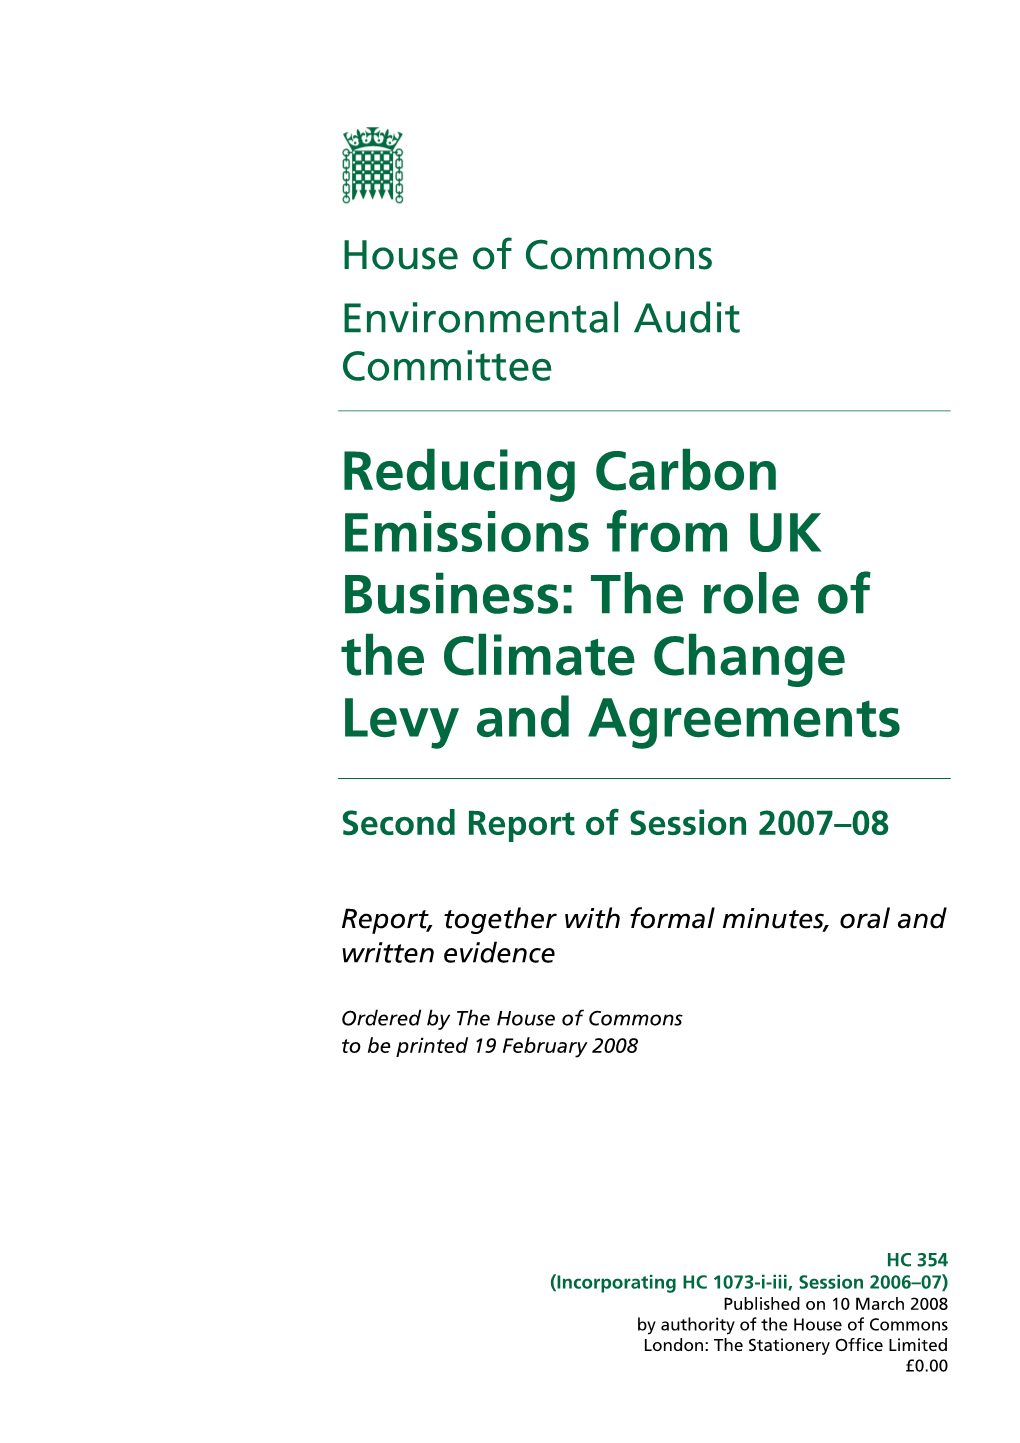 The Role of the Climate Change Levy and Agreements